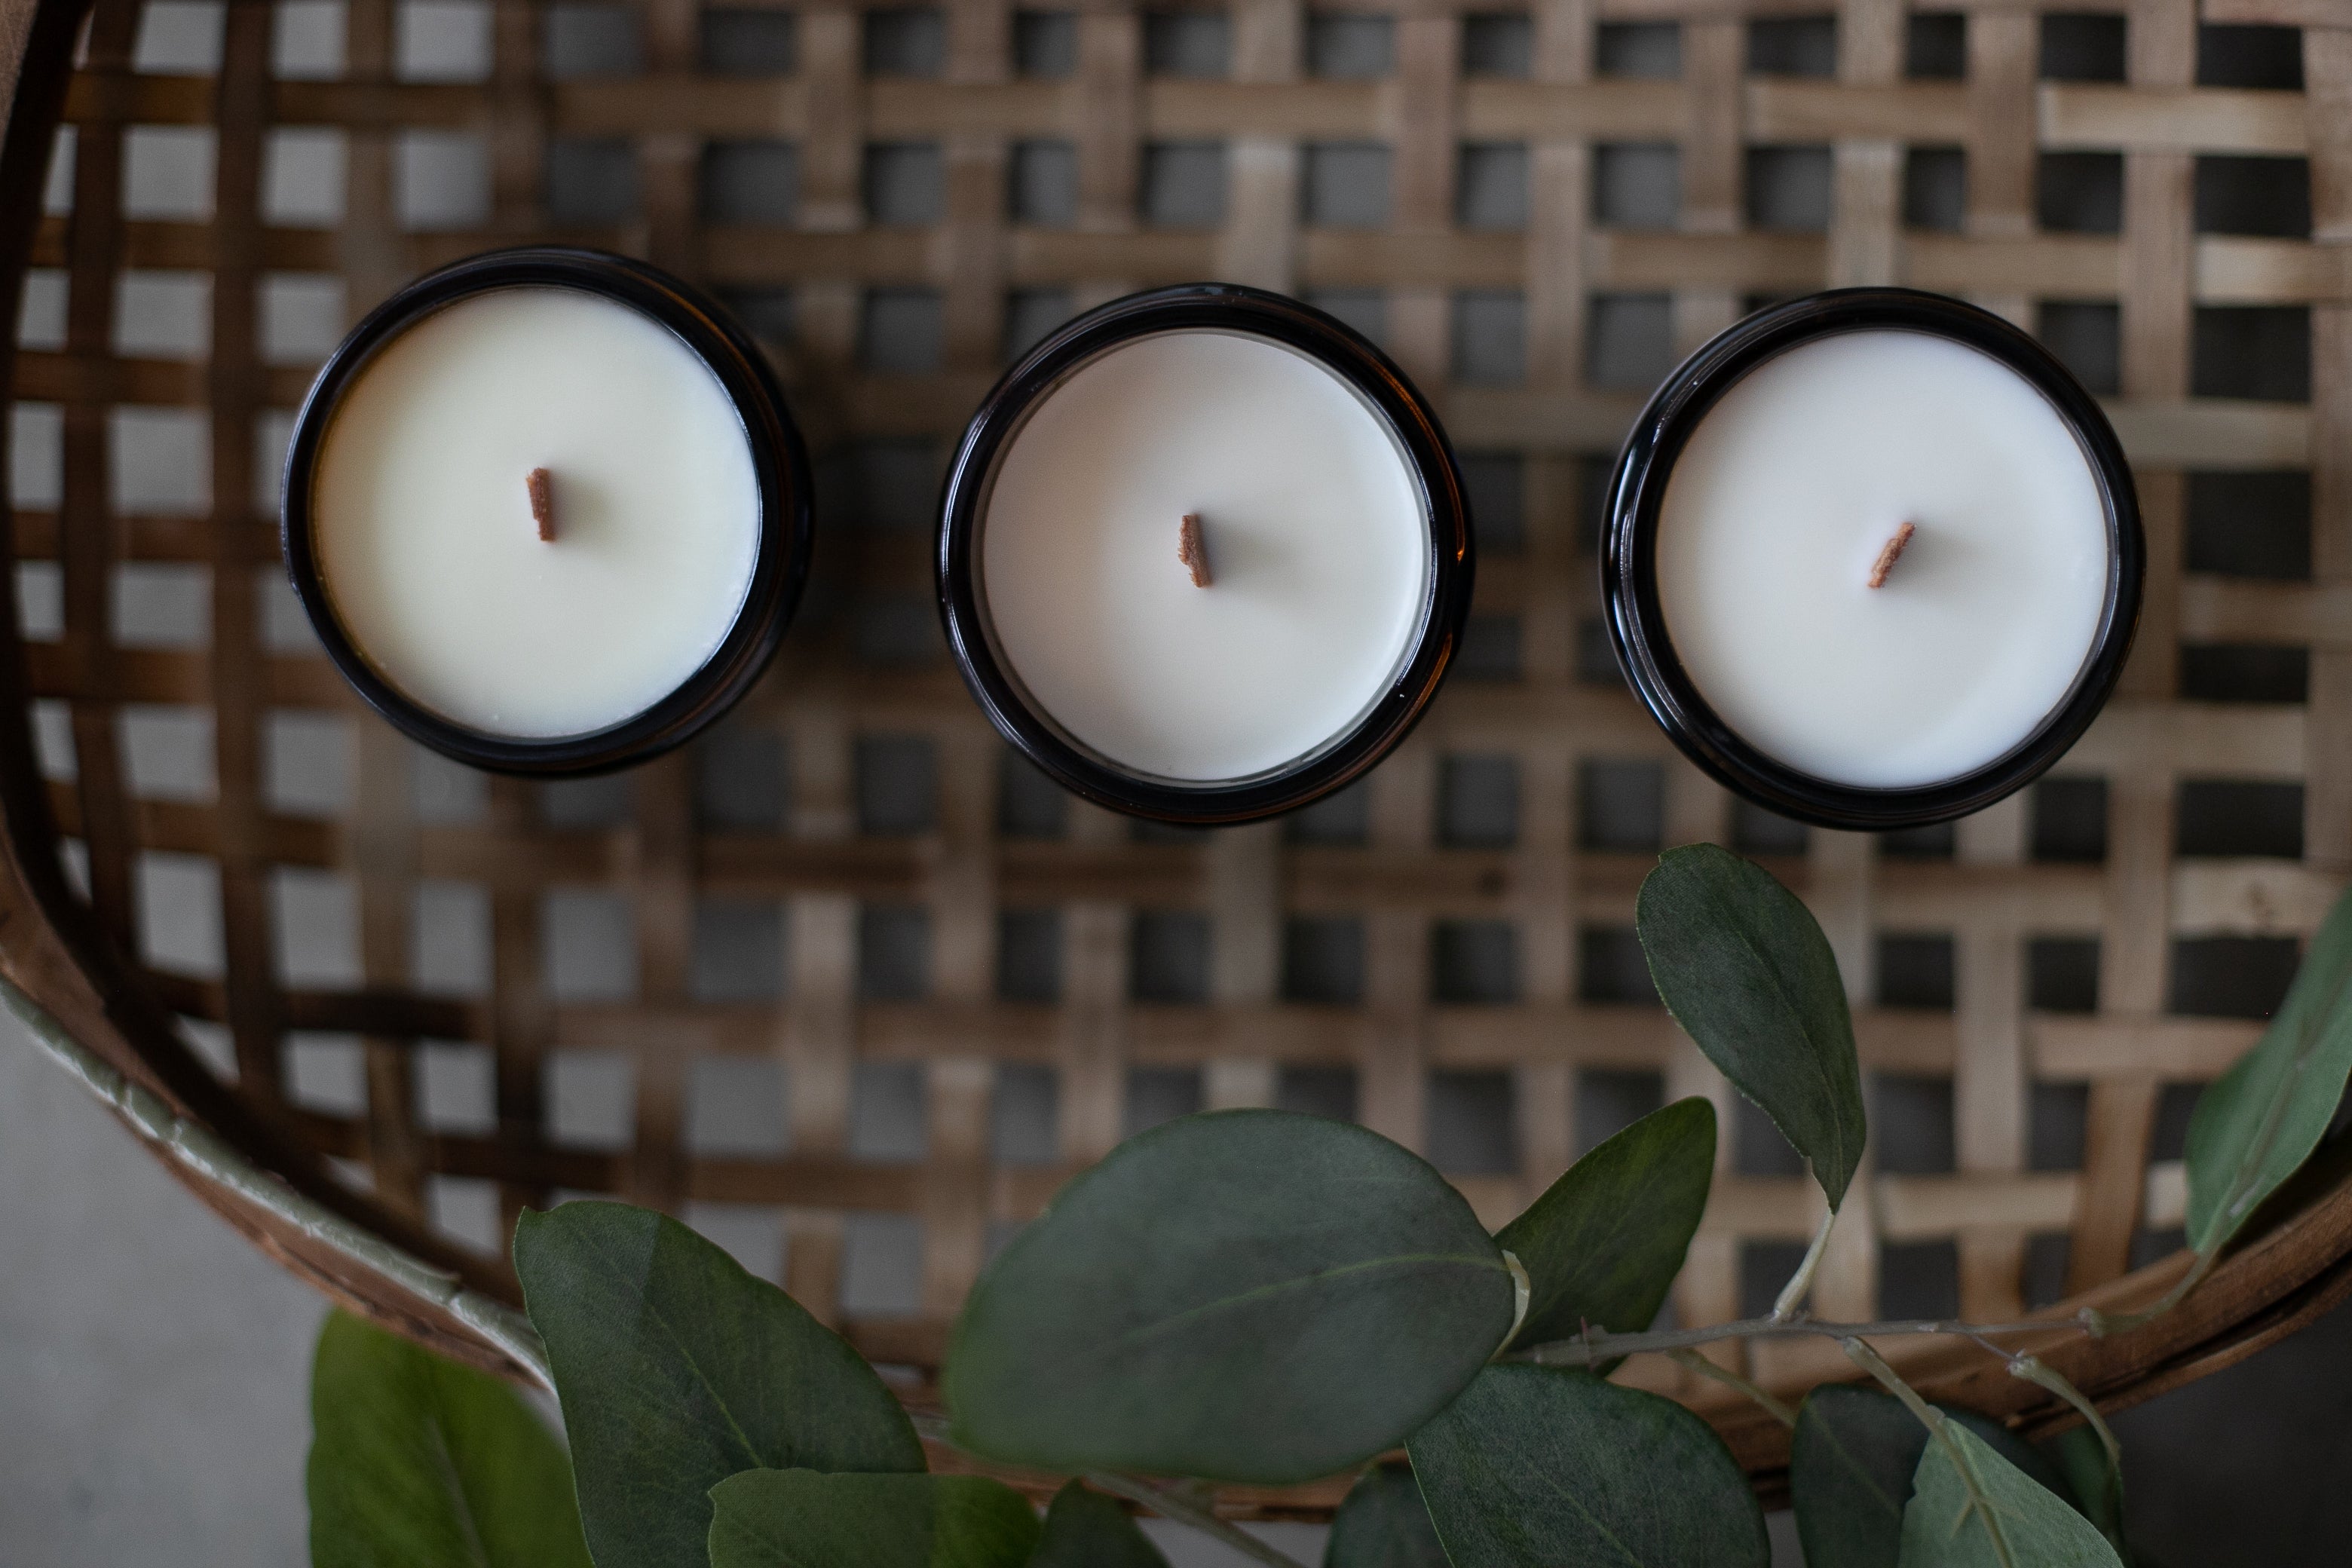 Farmhouse Charm Candles, situated in Calgary, Alberta specializes in hand-poured soy wax candles that prioritize sustainability, quality, and nostalgia. The company is driven by a mission to introduce cozy and nostalgic ambiance of clean-burning scented candles into every home. They aspire to create a world where candles not only bring warmth, joy, and a feeling of connection into people's homes but also advocate for sustainability and environmental consciousness.